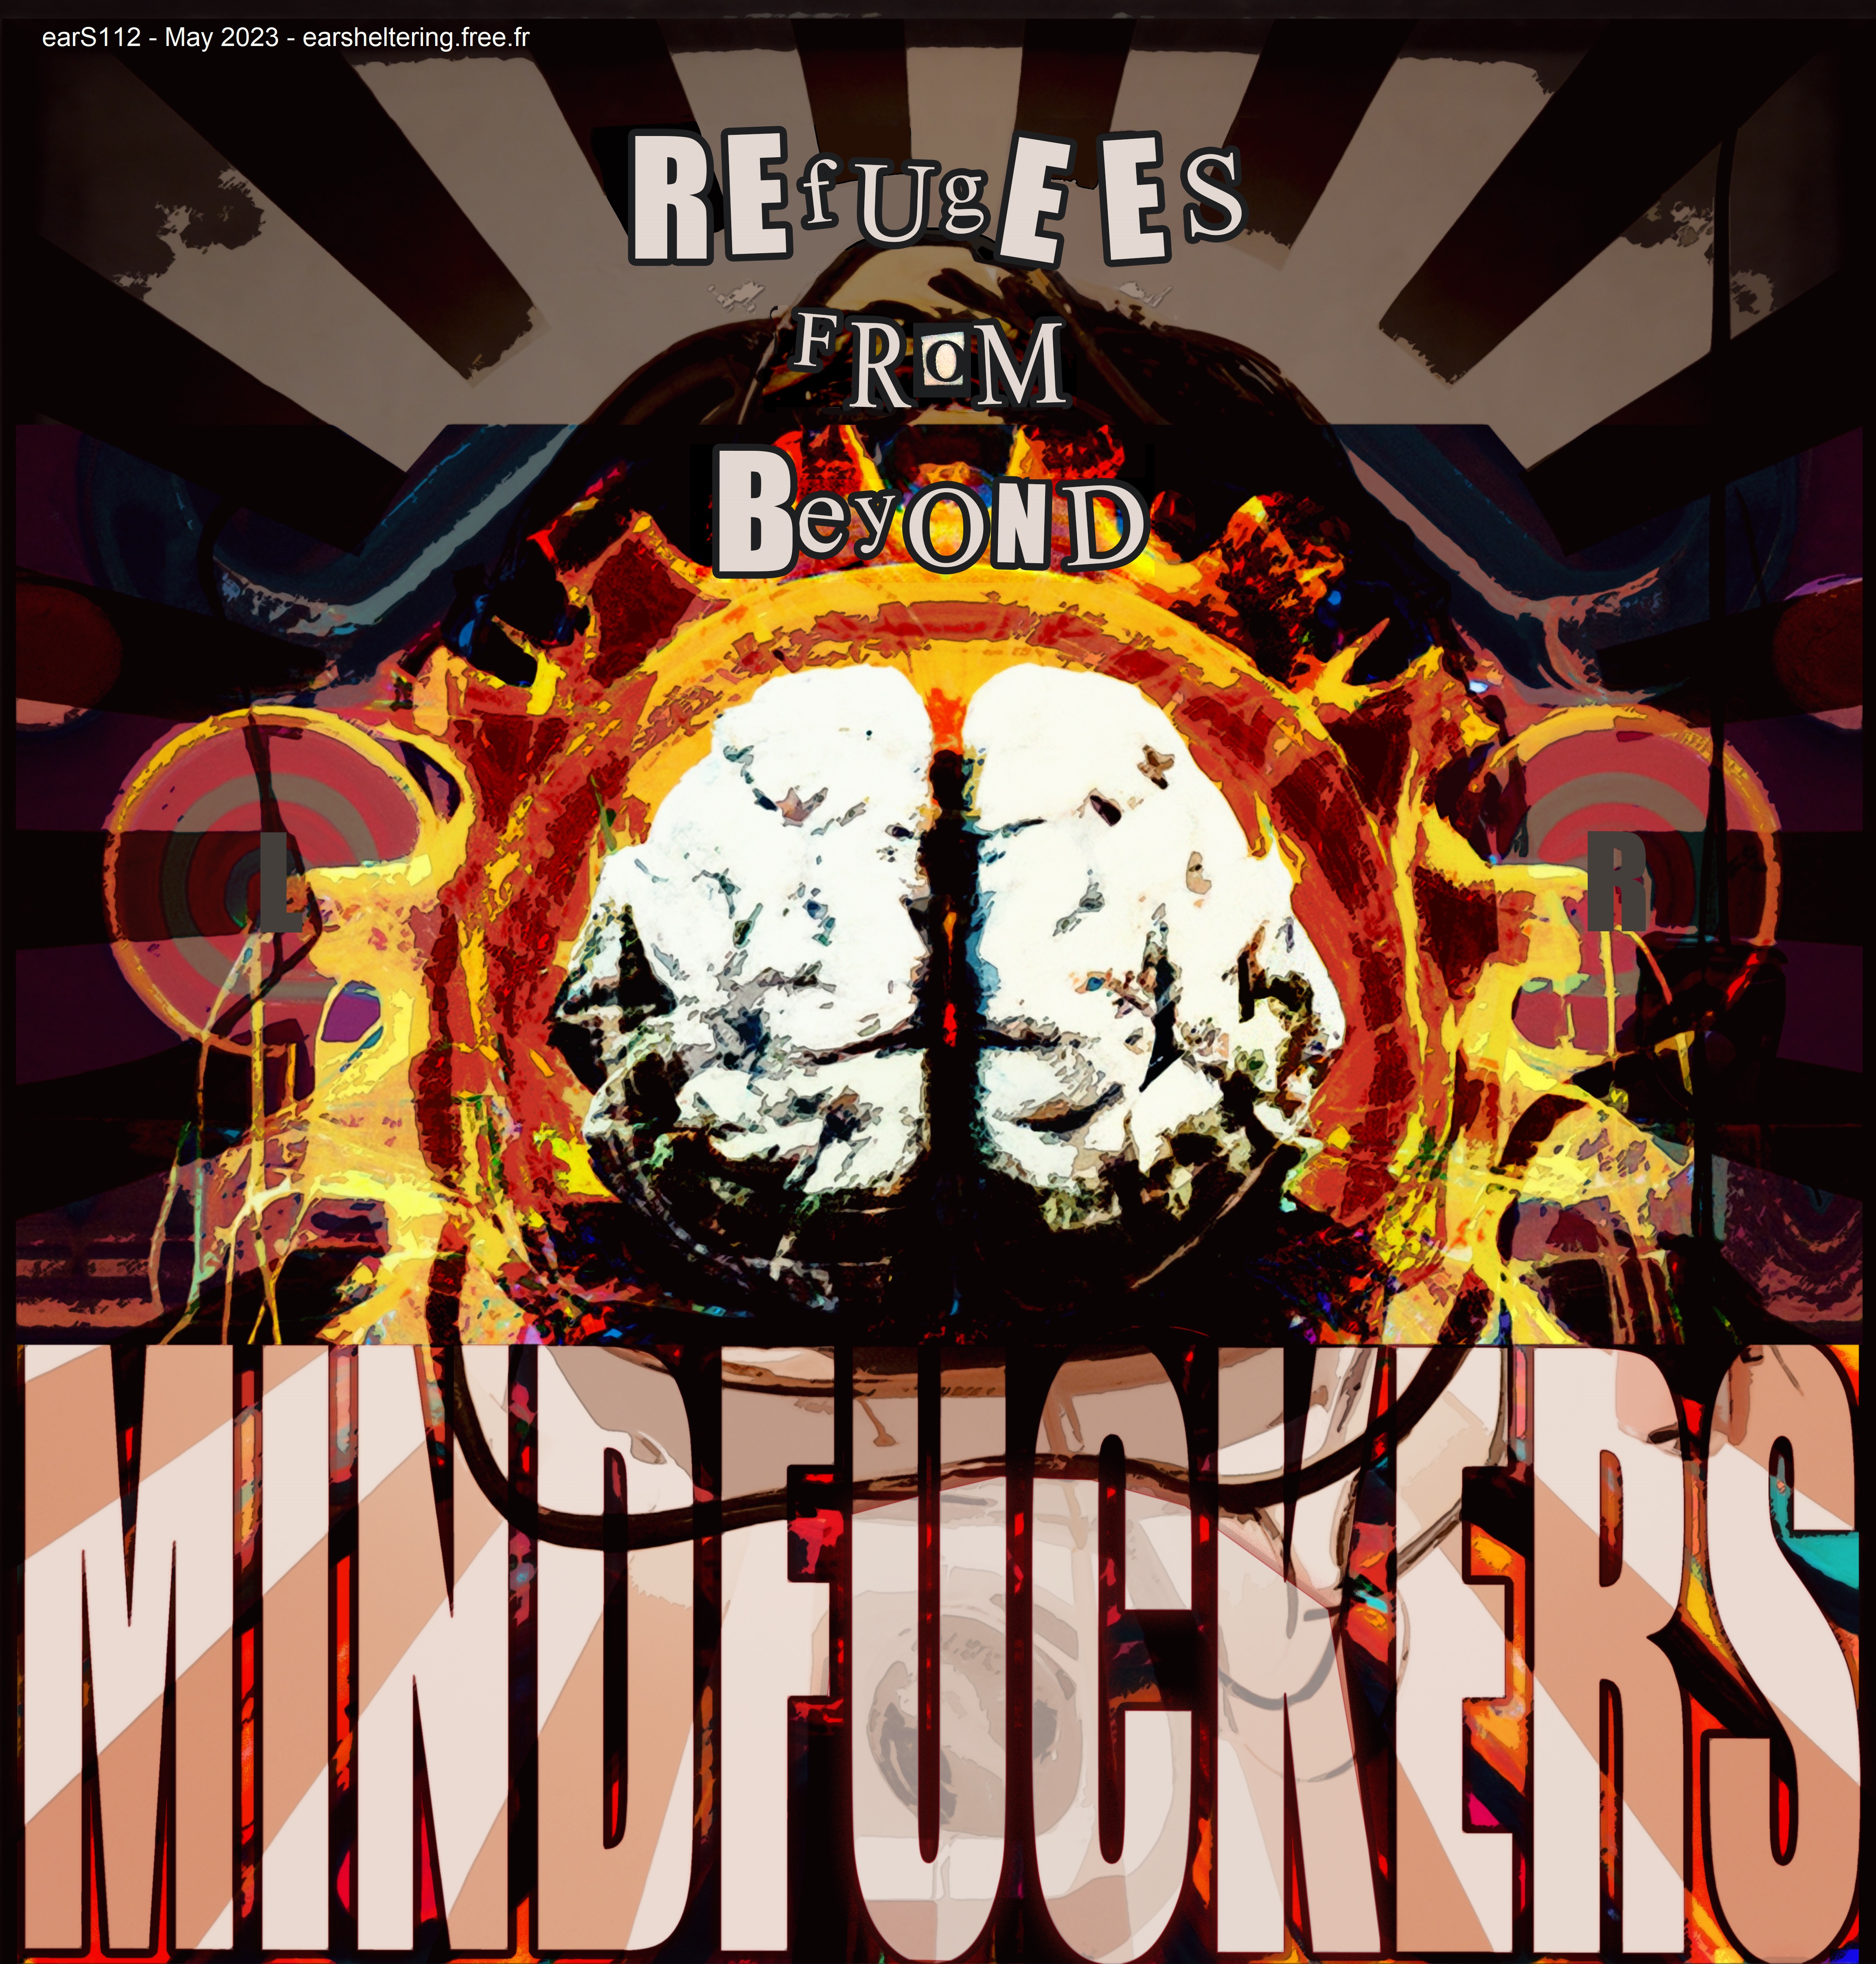 REfugEEs From Beyond – Mindfuckers